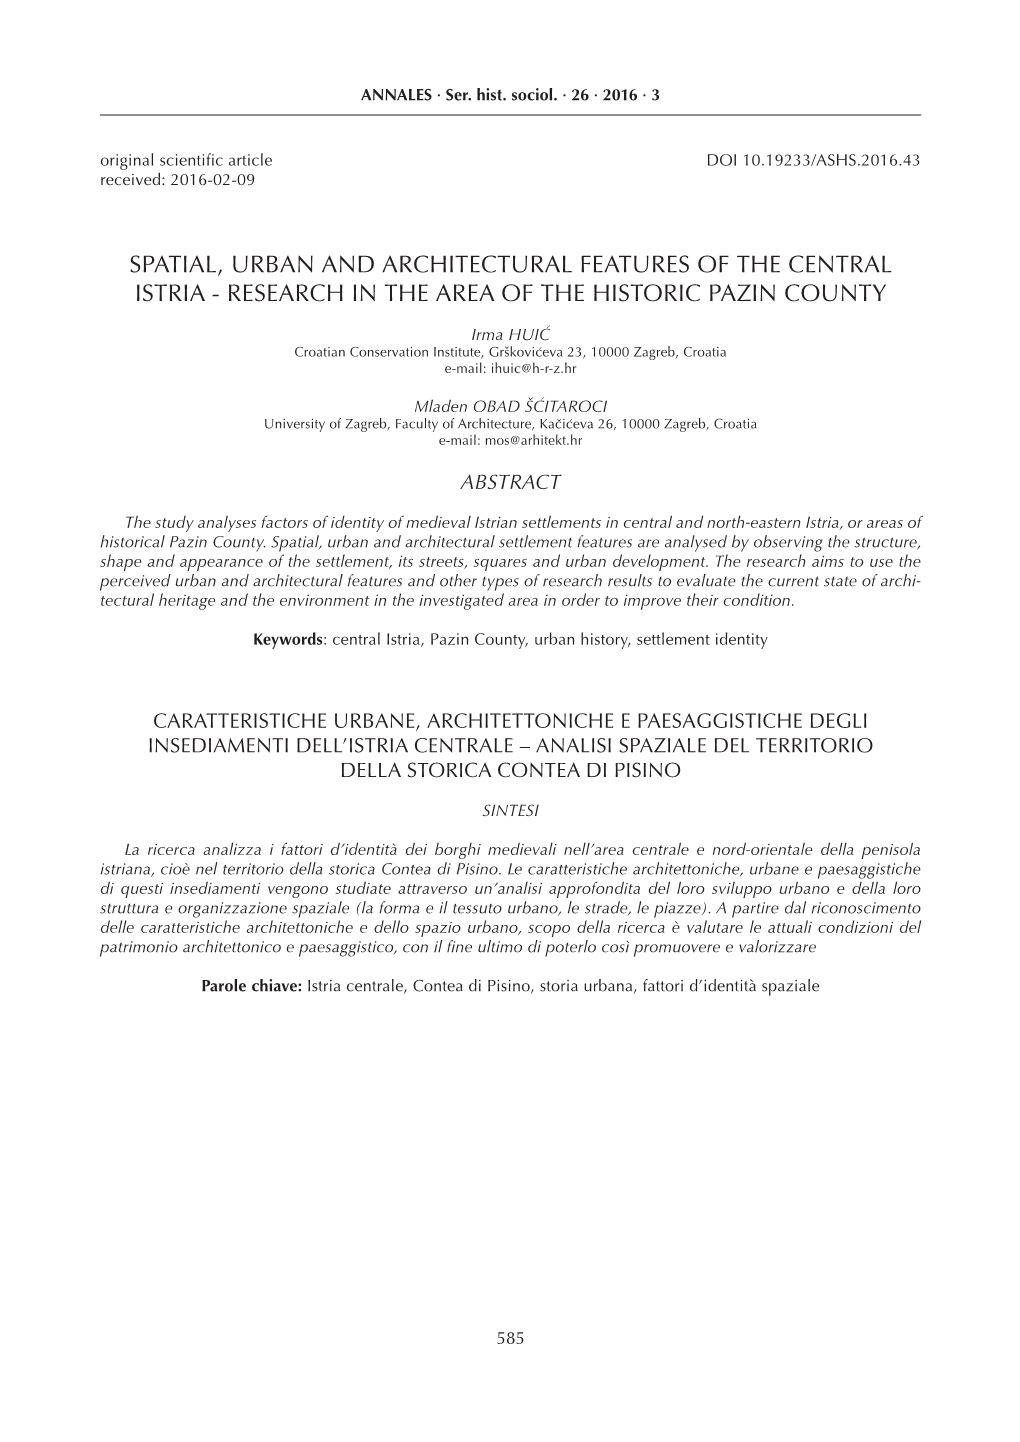 Spatial, Urban and Architectural Features of the Central Istria - Research in the Area of the Historic Pazin County